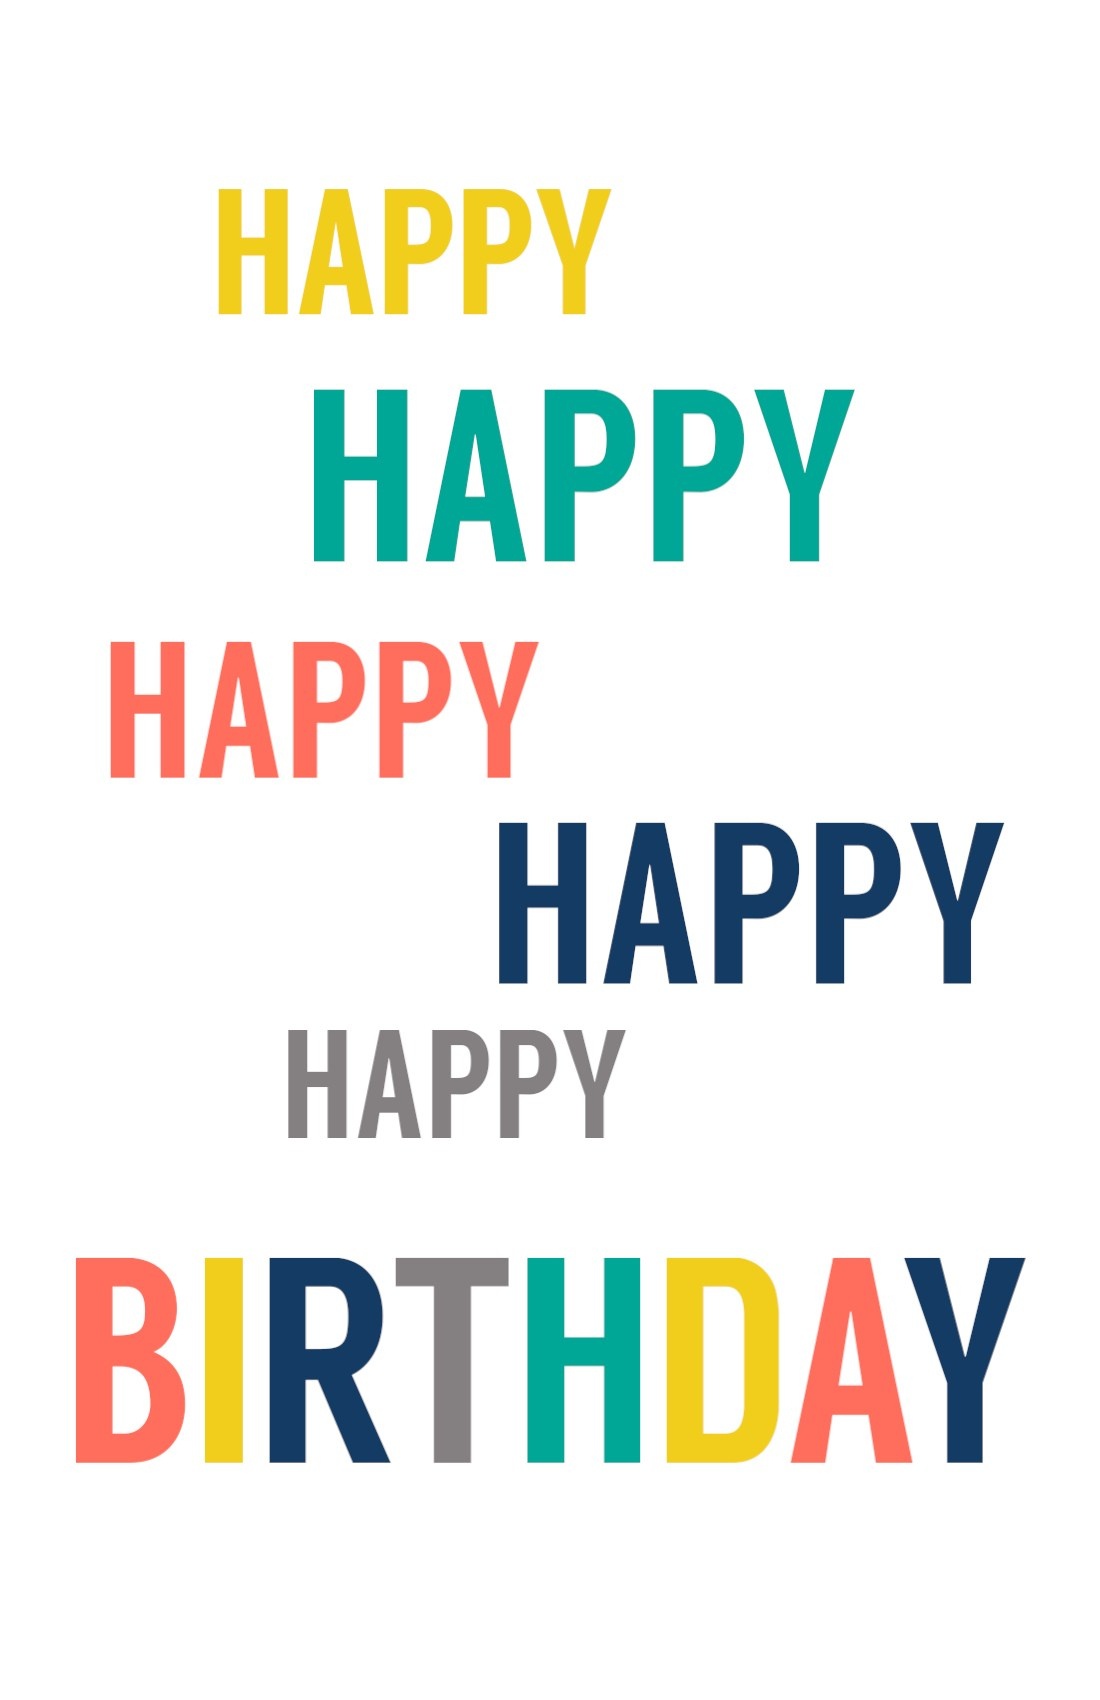 Free Printable Birthday Cards - Paper Trail Design - Free Printable Birthday Cards For Adults